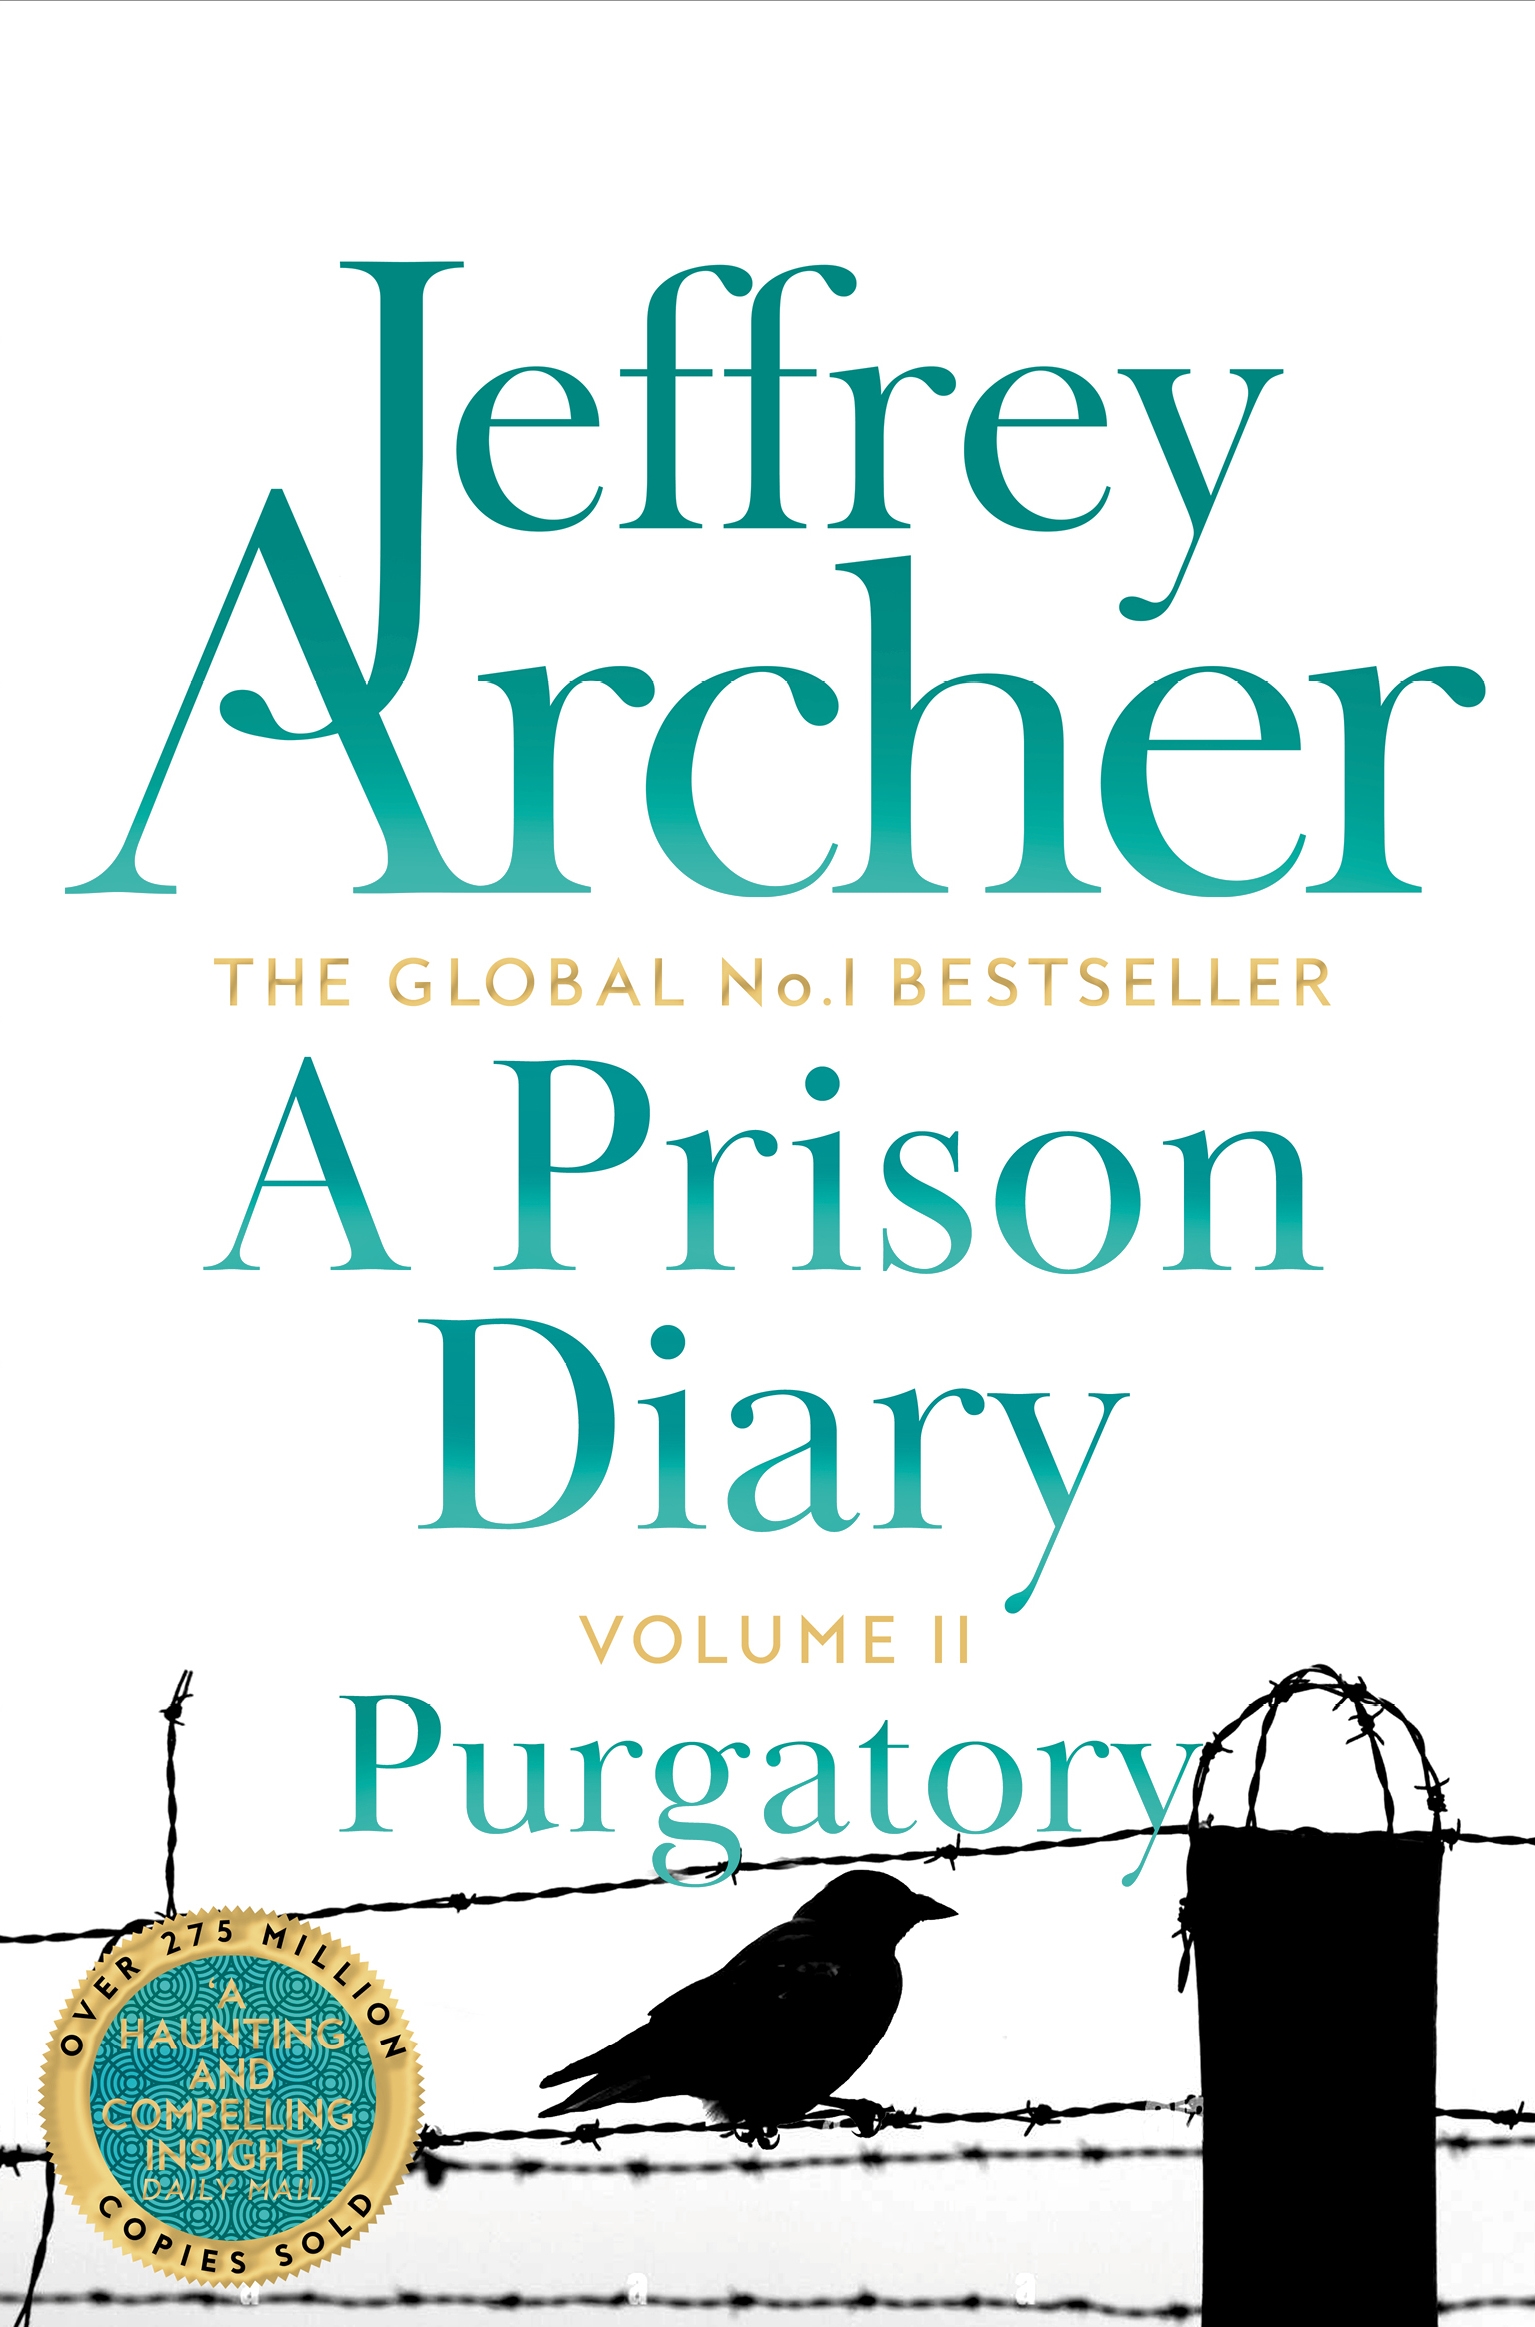 Purgatory. A Prison Diary by Jeffrey Archer. Part 2 of The Prison Diary Series